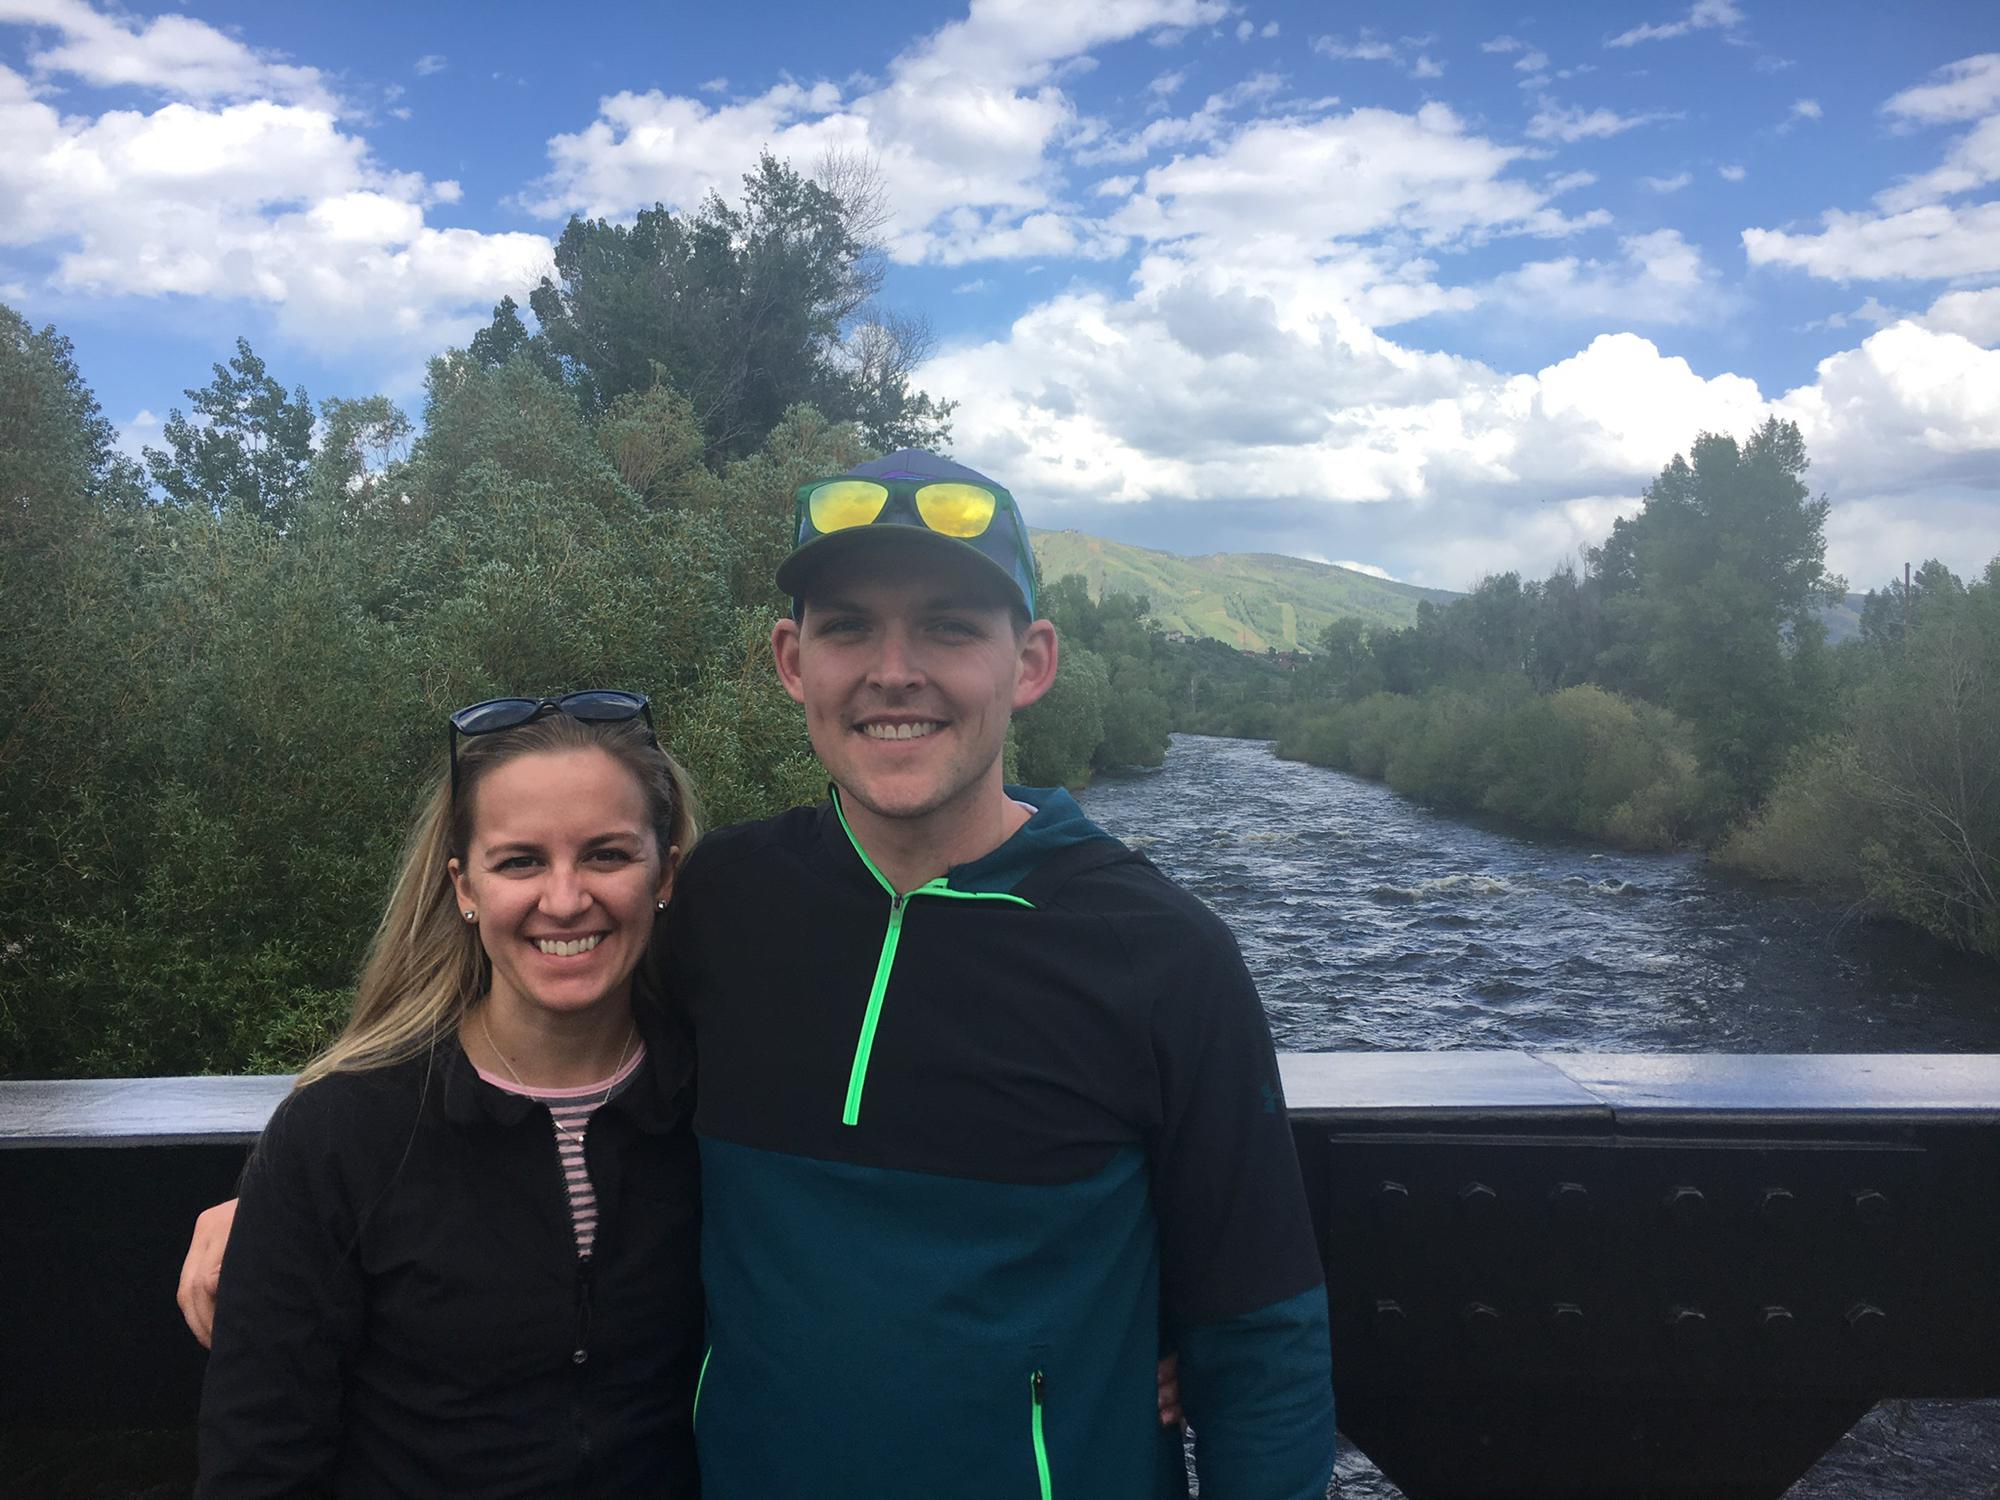 Our first trip to Steamboat, CO